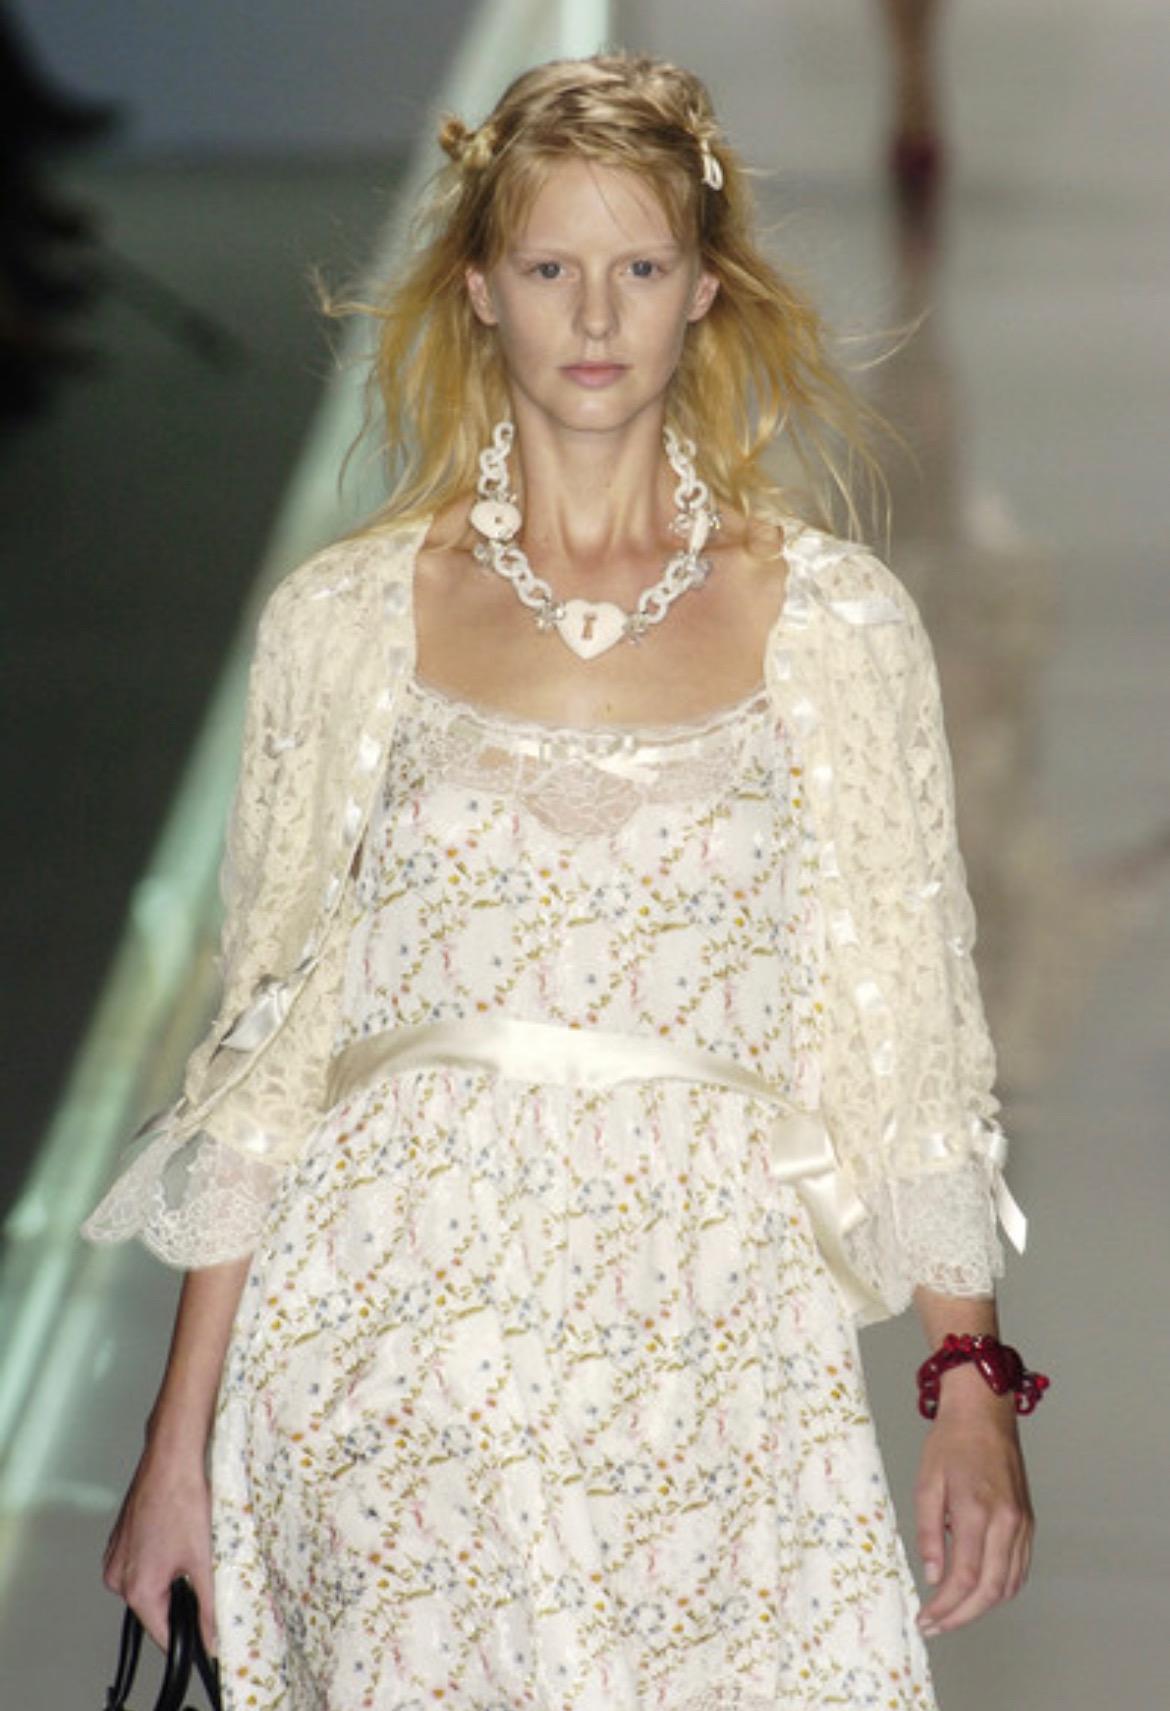 TheRealList presents: a floral Diorissimo print Christian Dior Boutique dress, designed by John Galliano. From the Spring/Summer 2005 collection, similar dresses debuted on the runway on looks 7 and 8. This silk slip dress features spaghetti straps